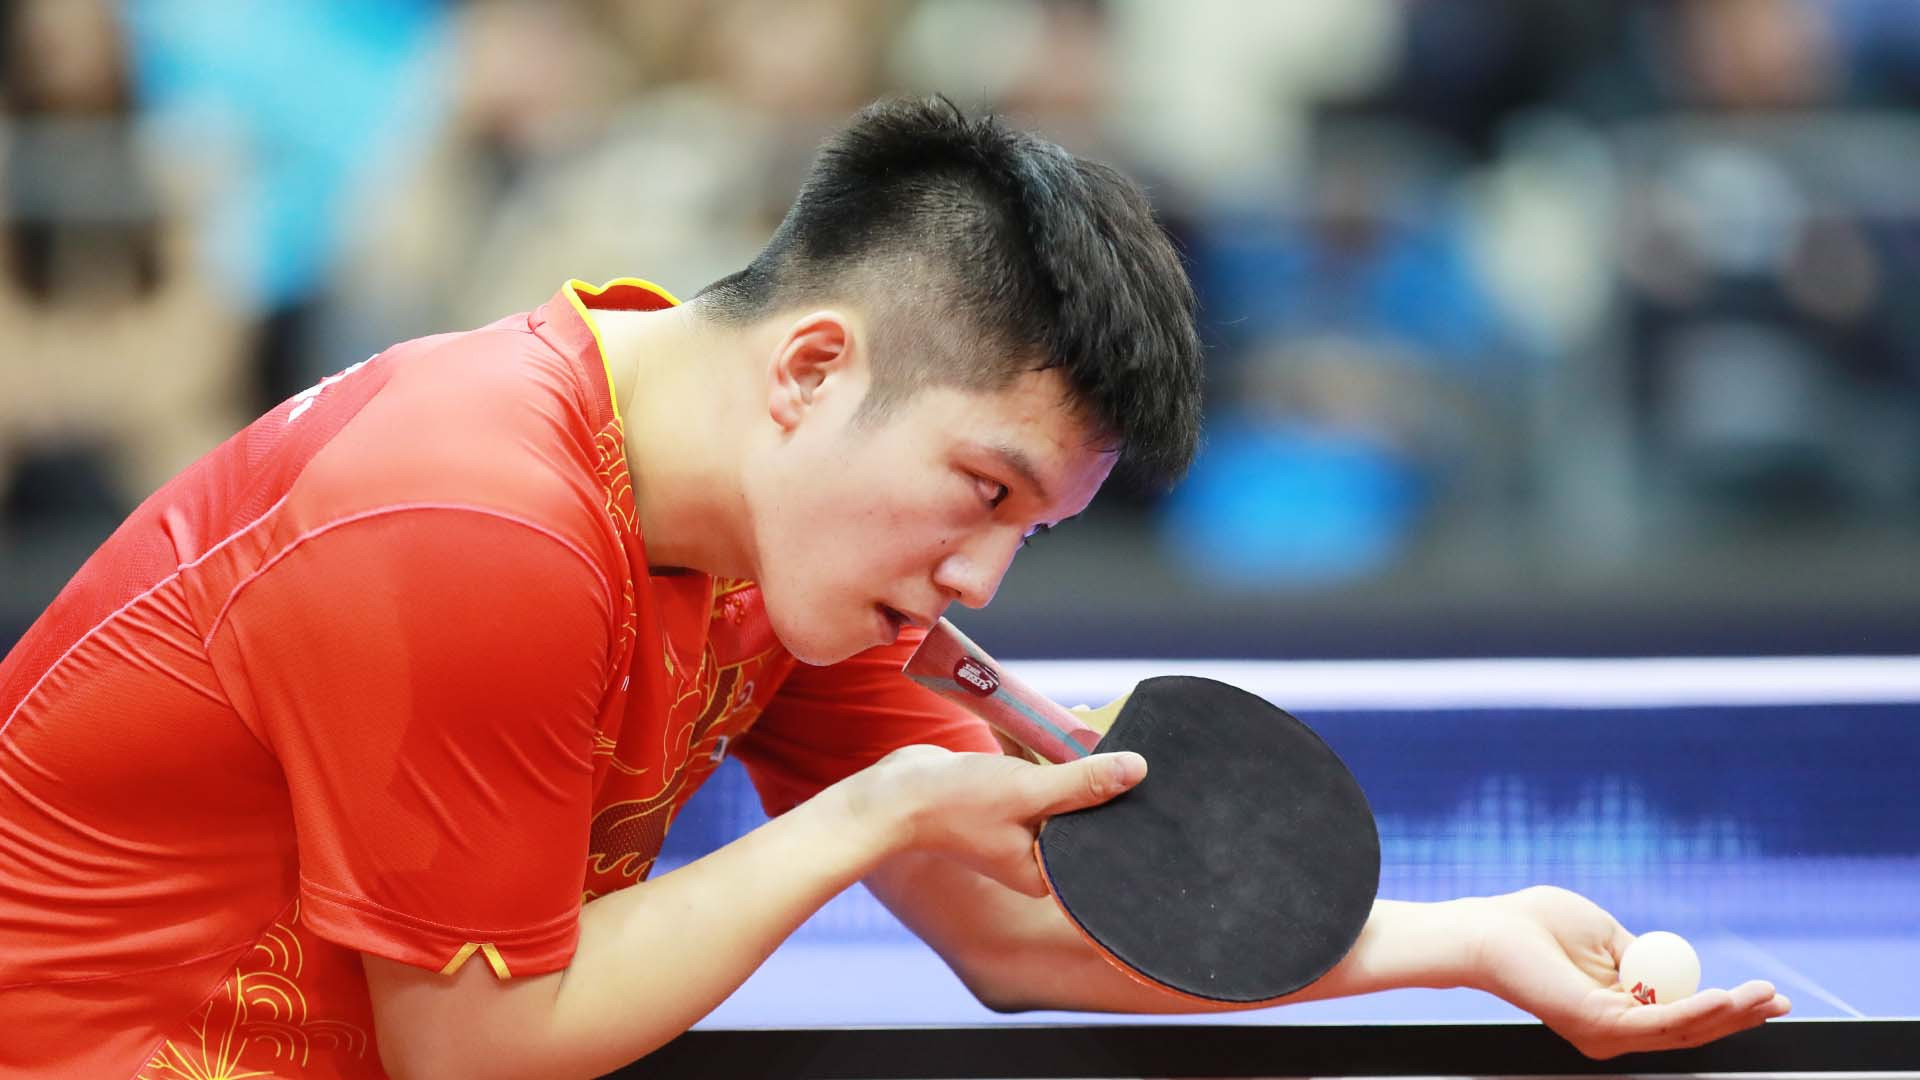 Stockholm ready to host last stop on ITTF World Tour calendar with Grand Finals places up for grabs